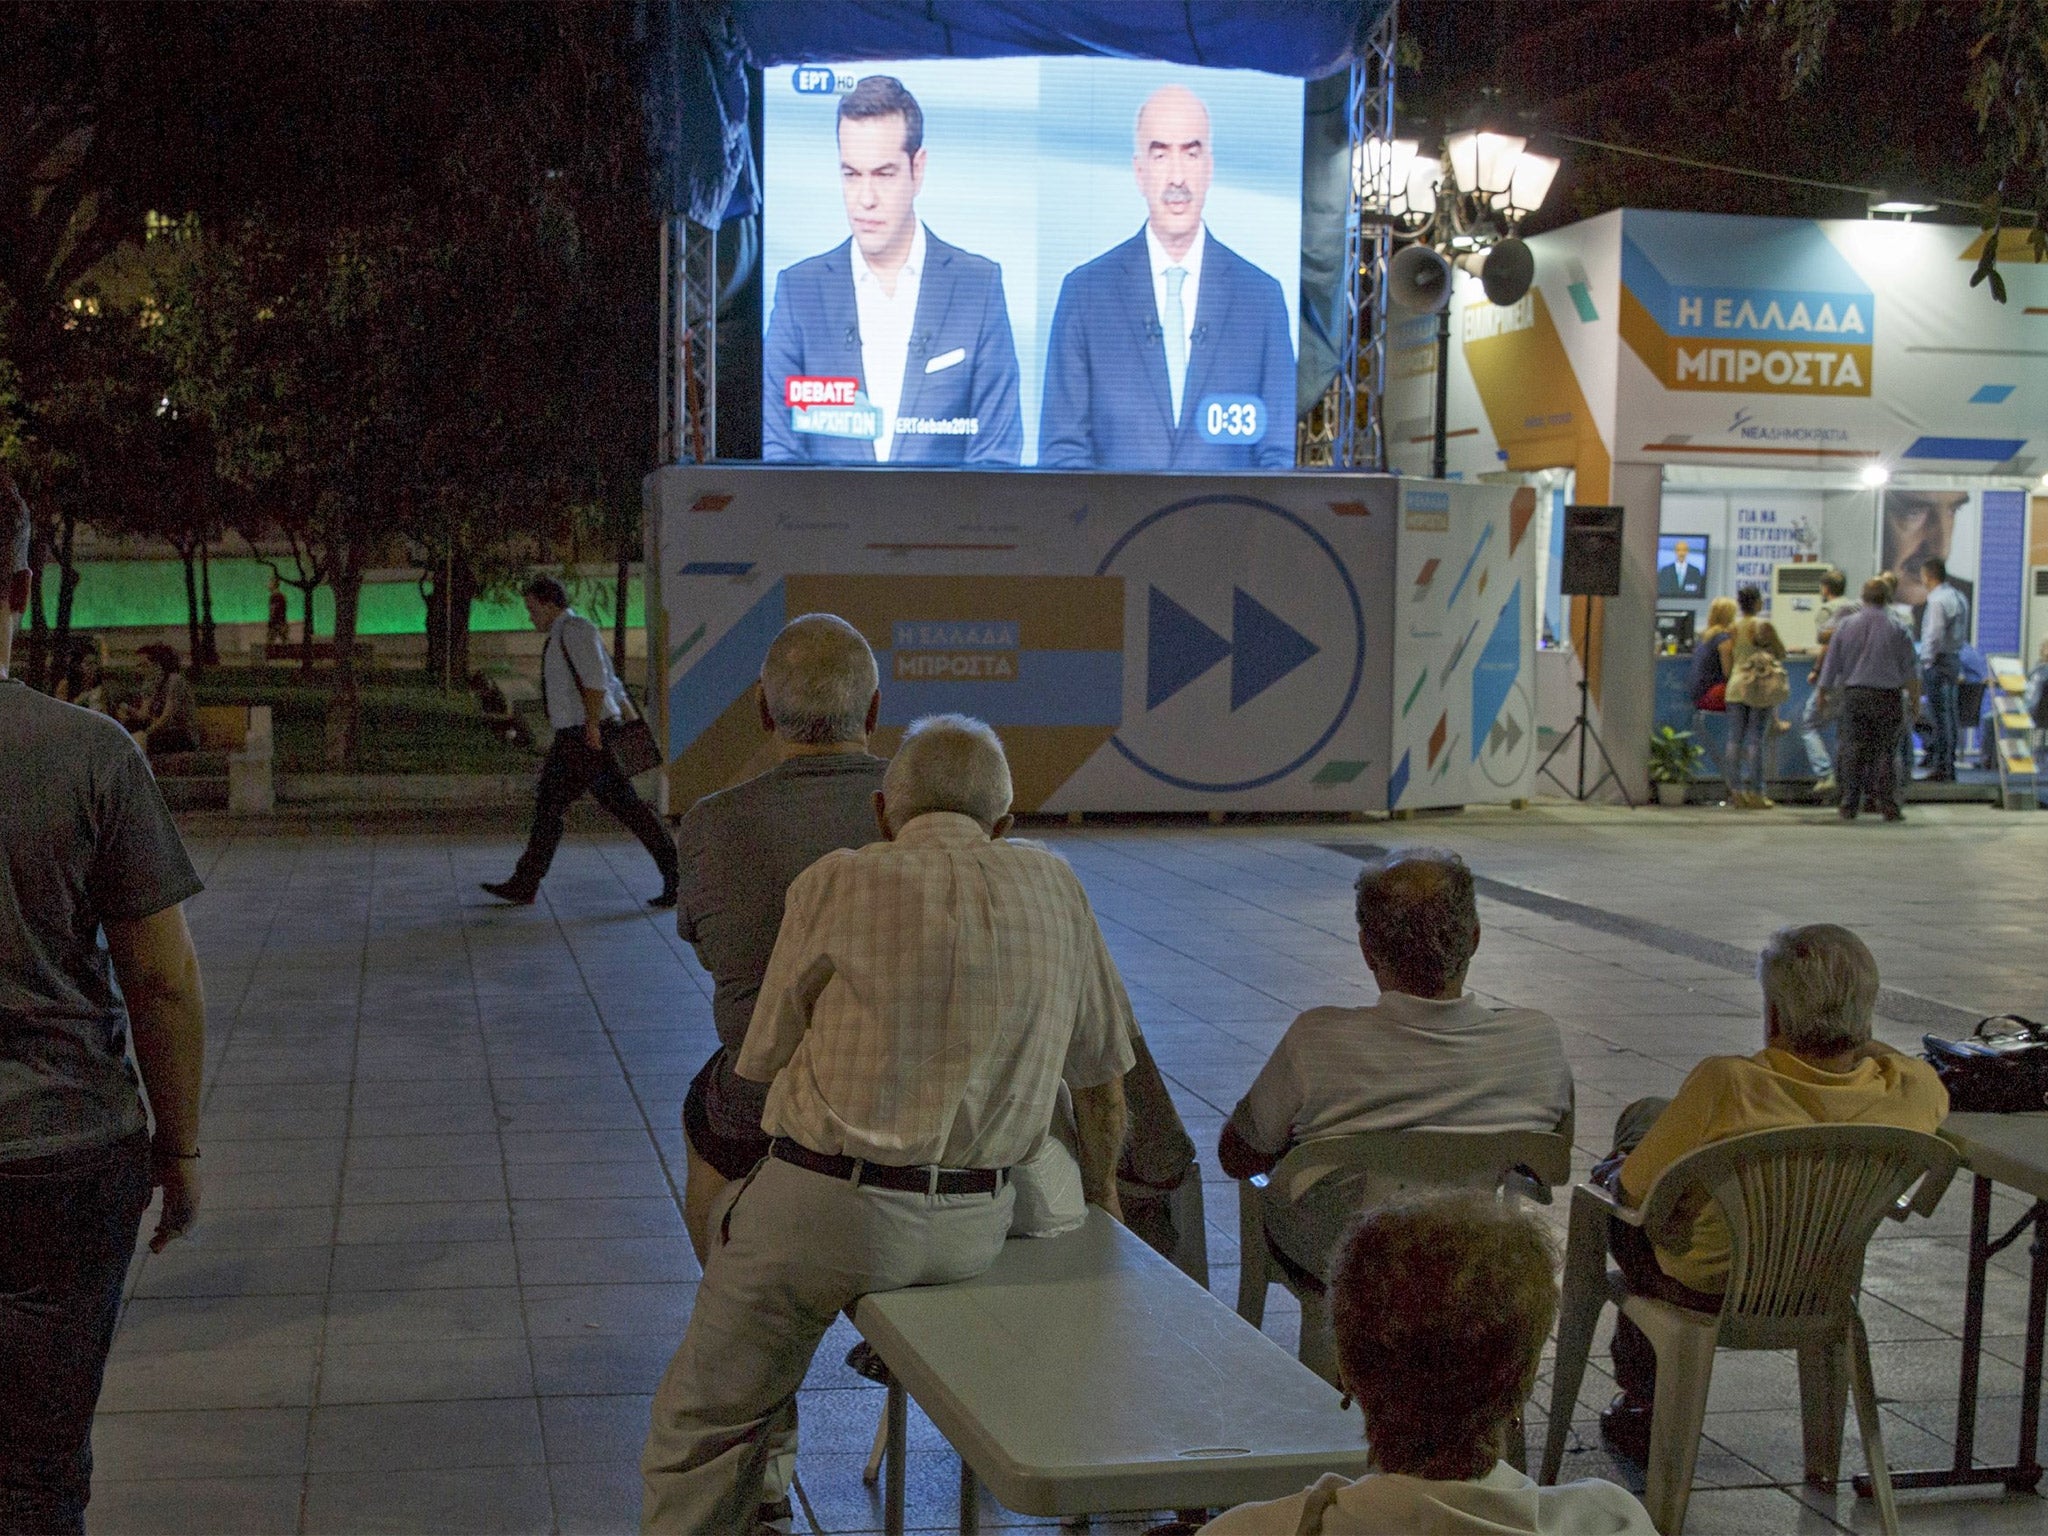 People watch the debate in Syntagma Square, Athens